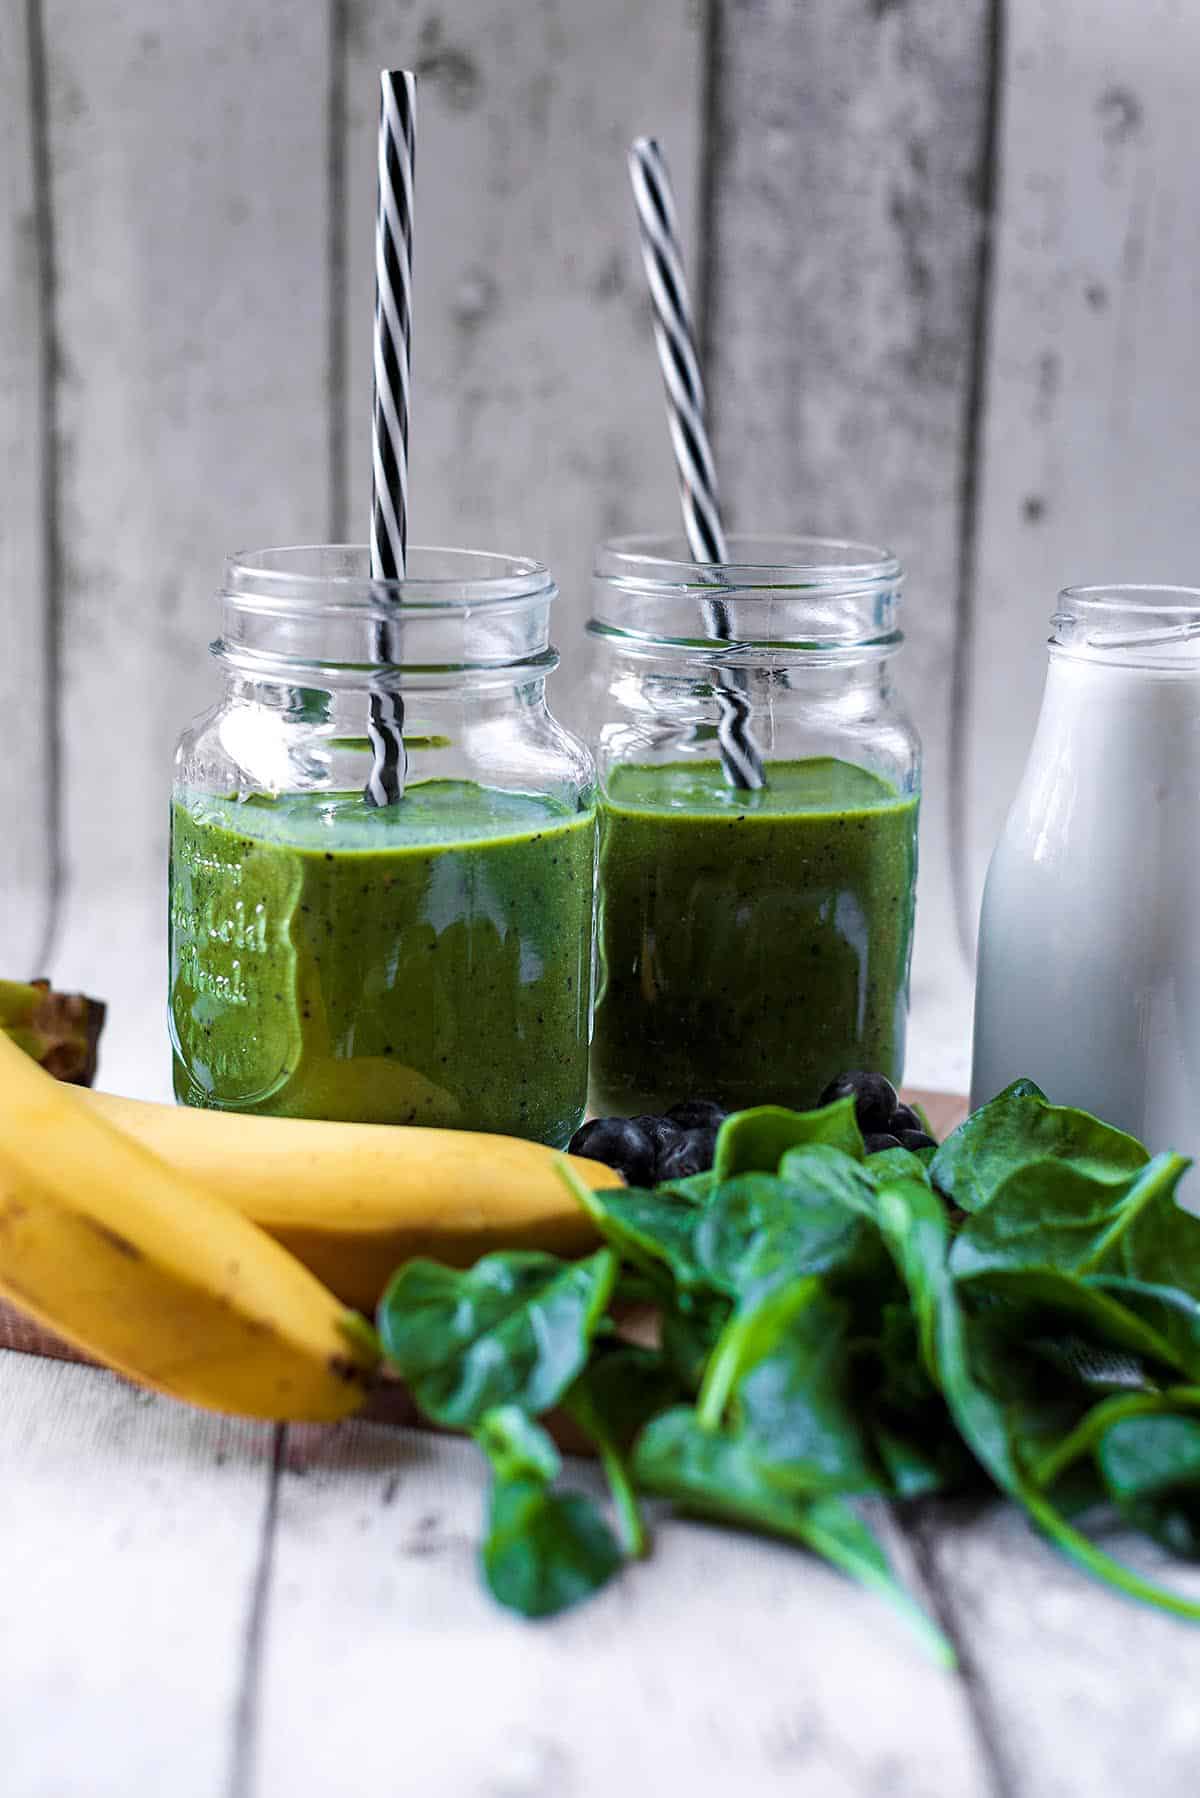 Two jars of green smoothie next to a bottle of milk, some bananas and a pile of spinach.